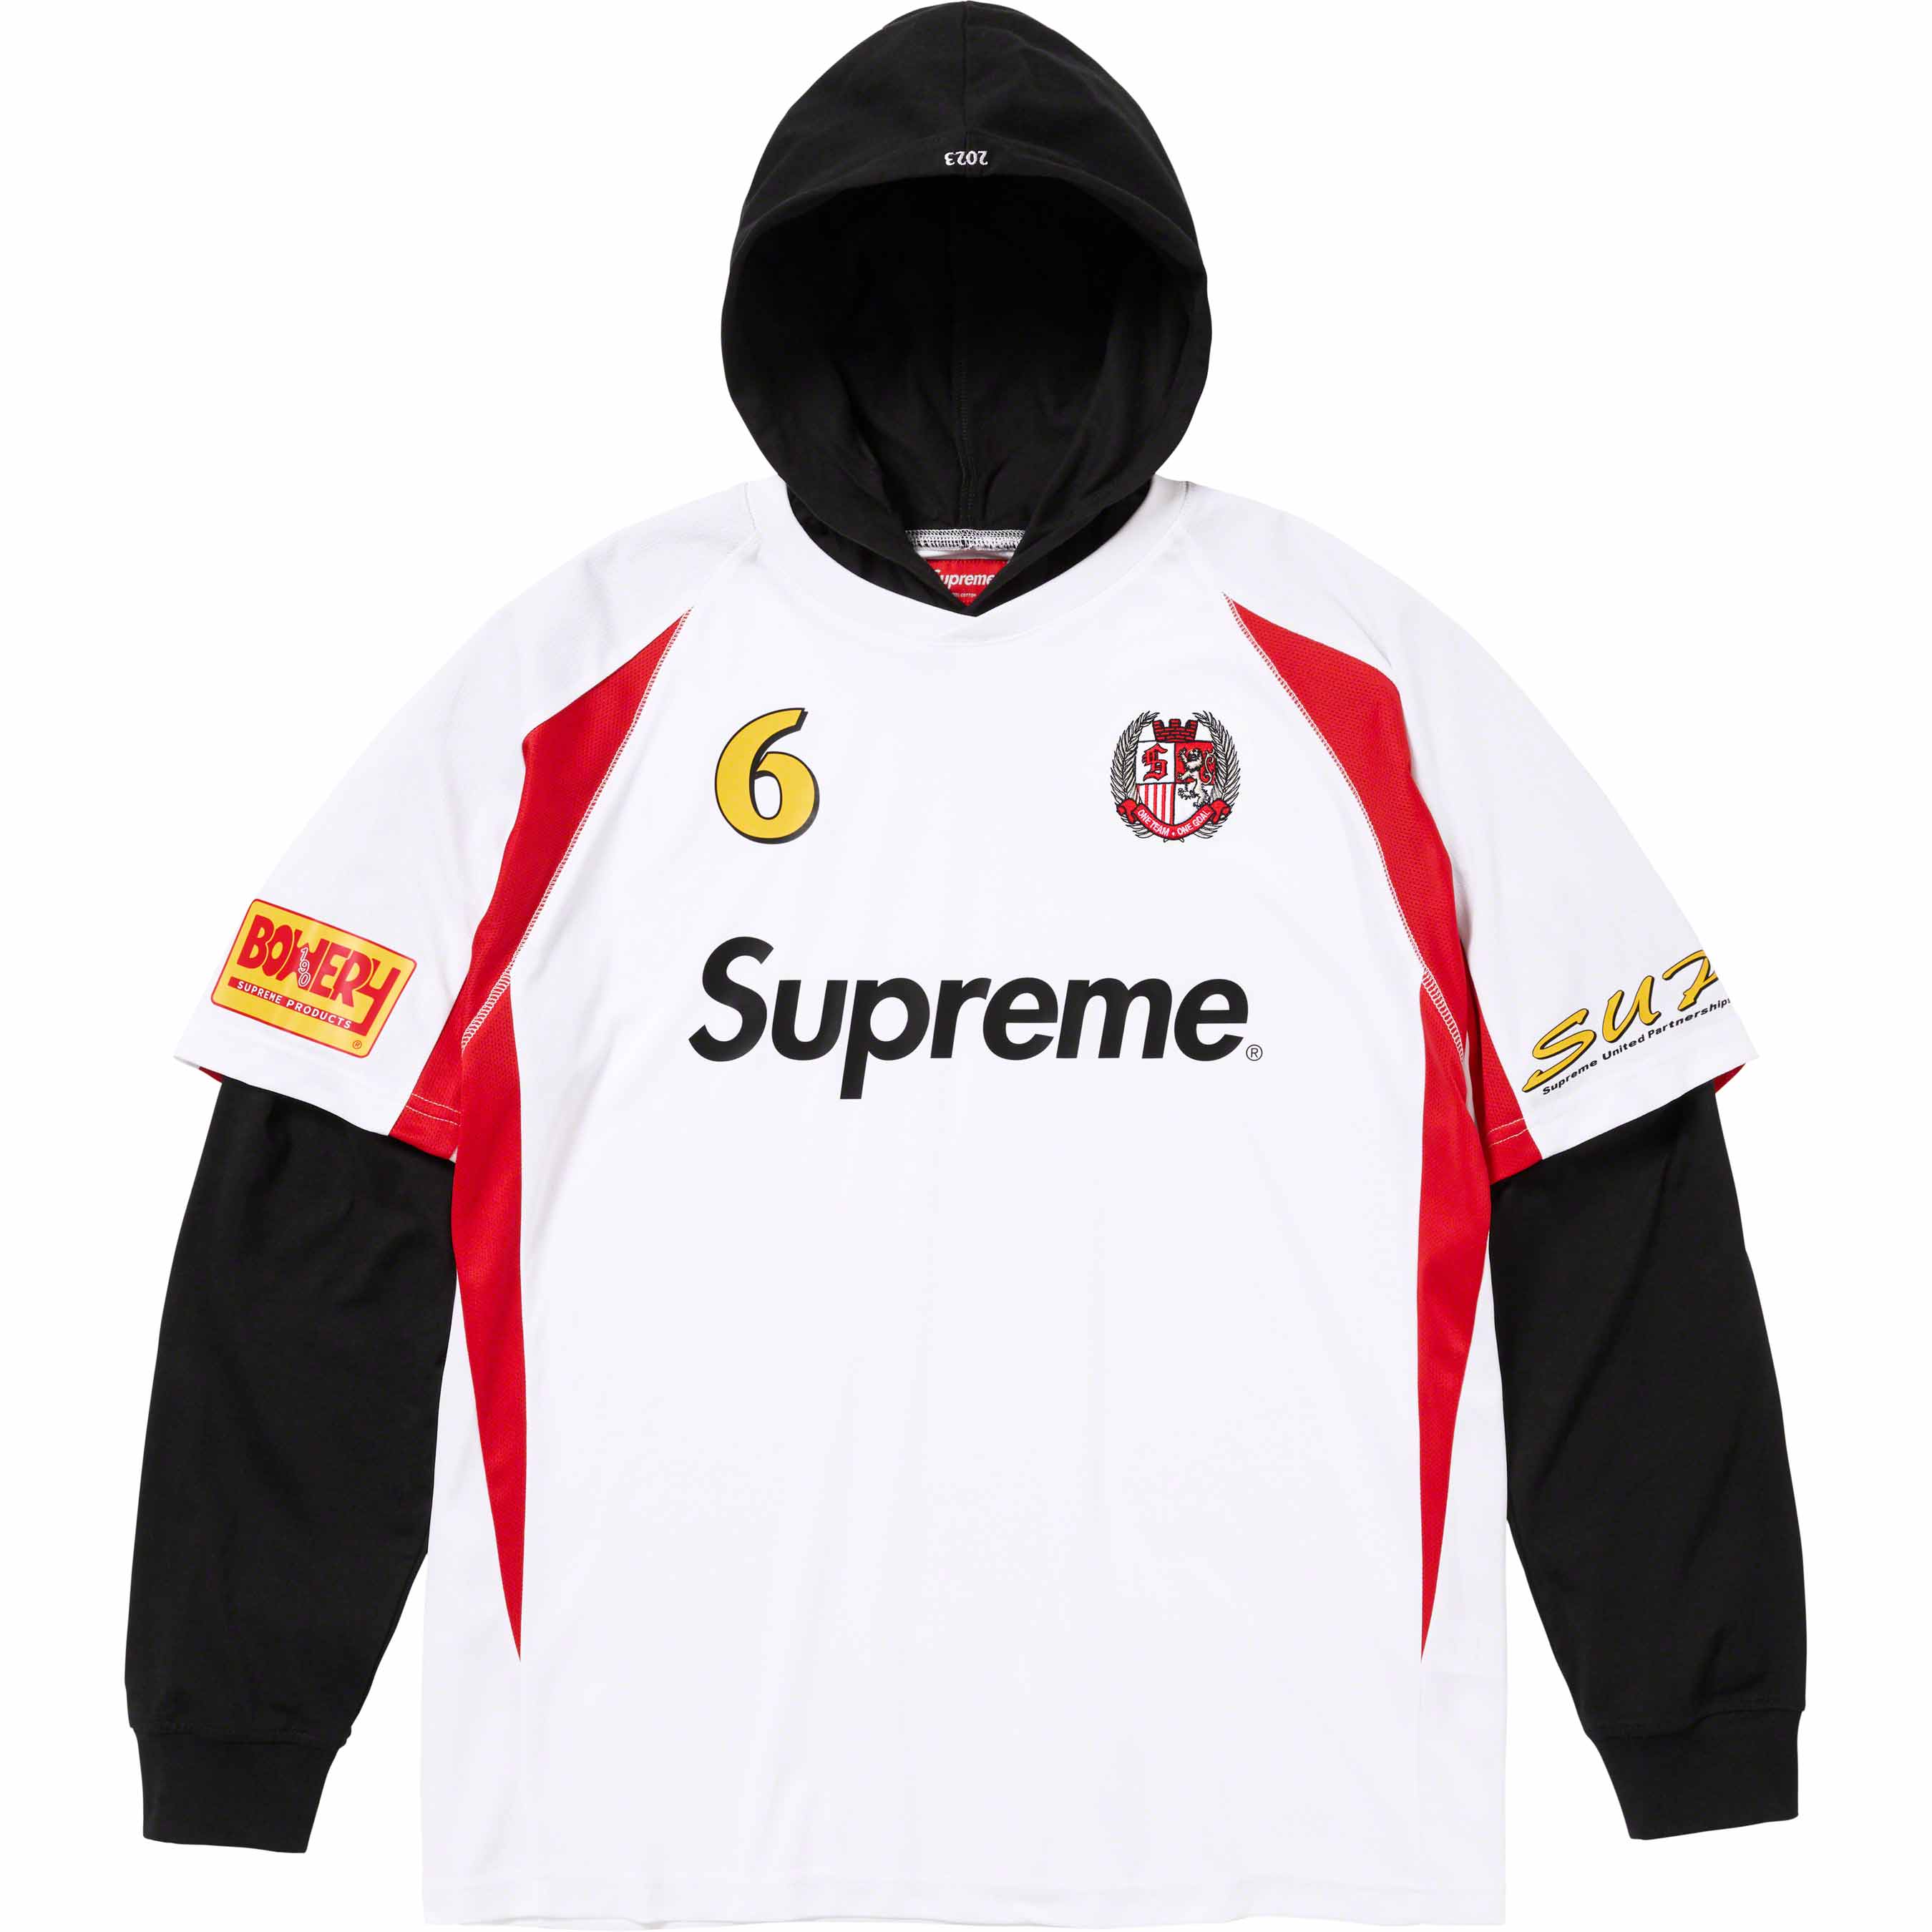 Supreme Hooded Soccer Jersey White